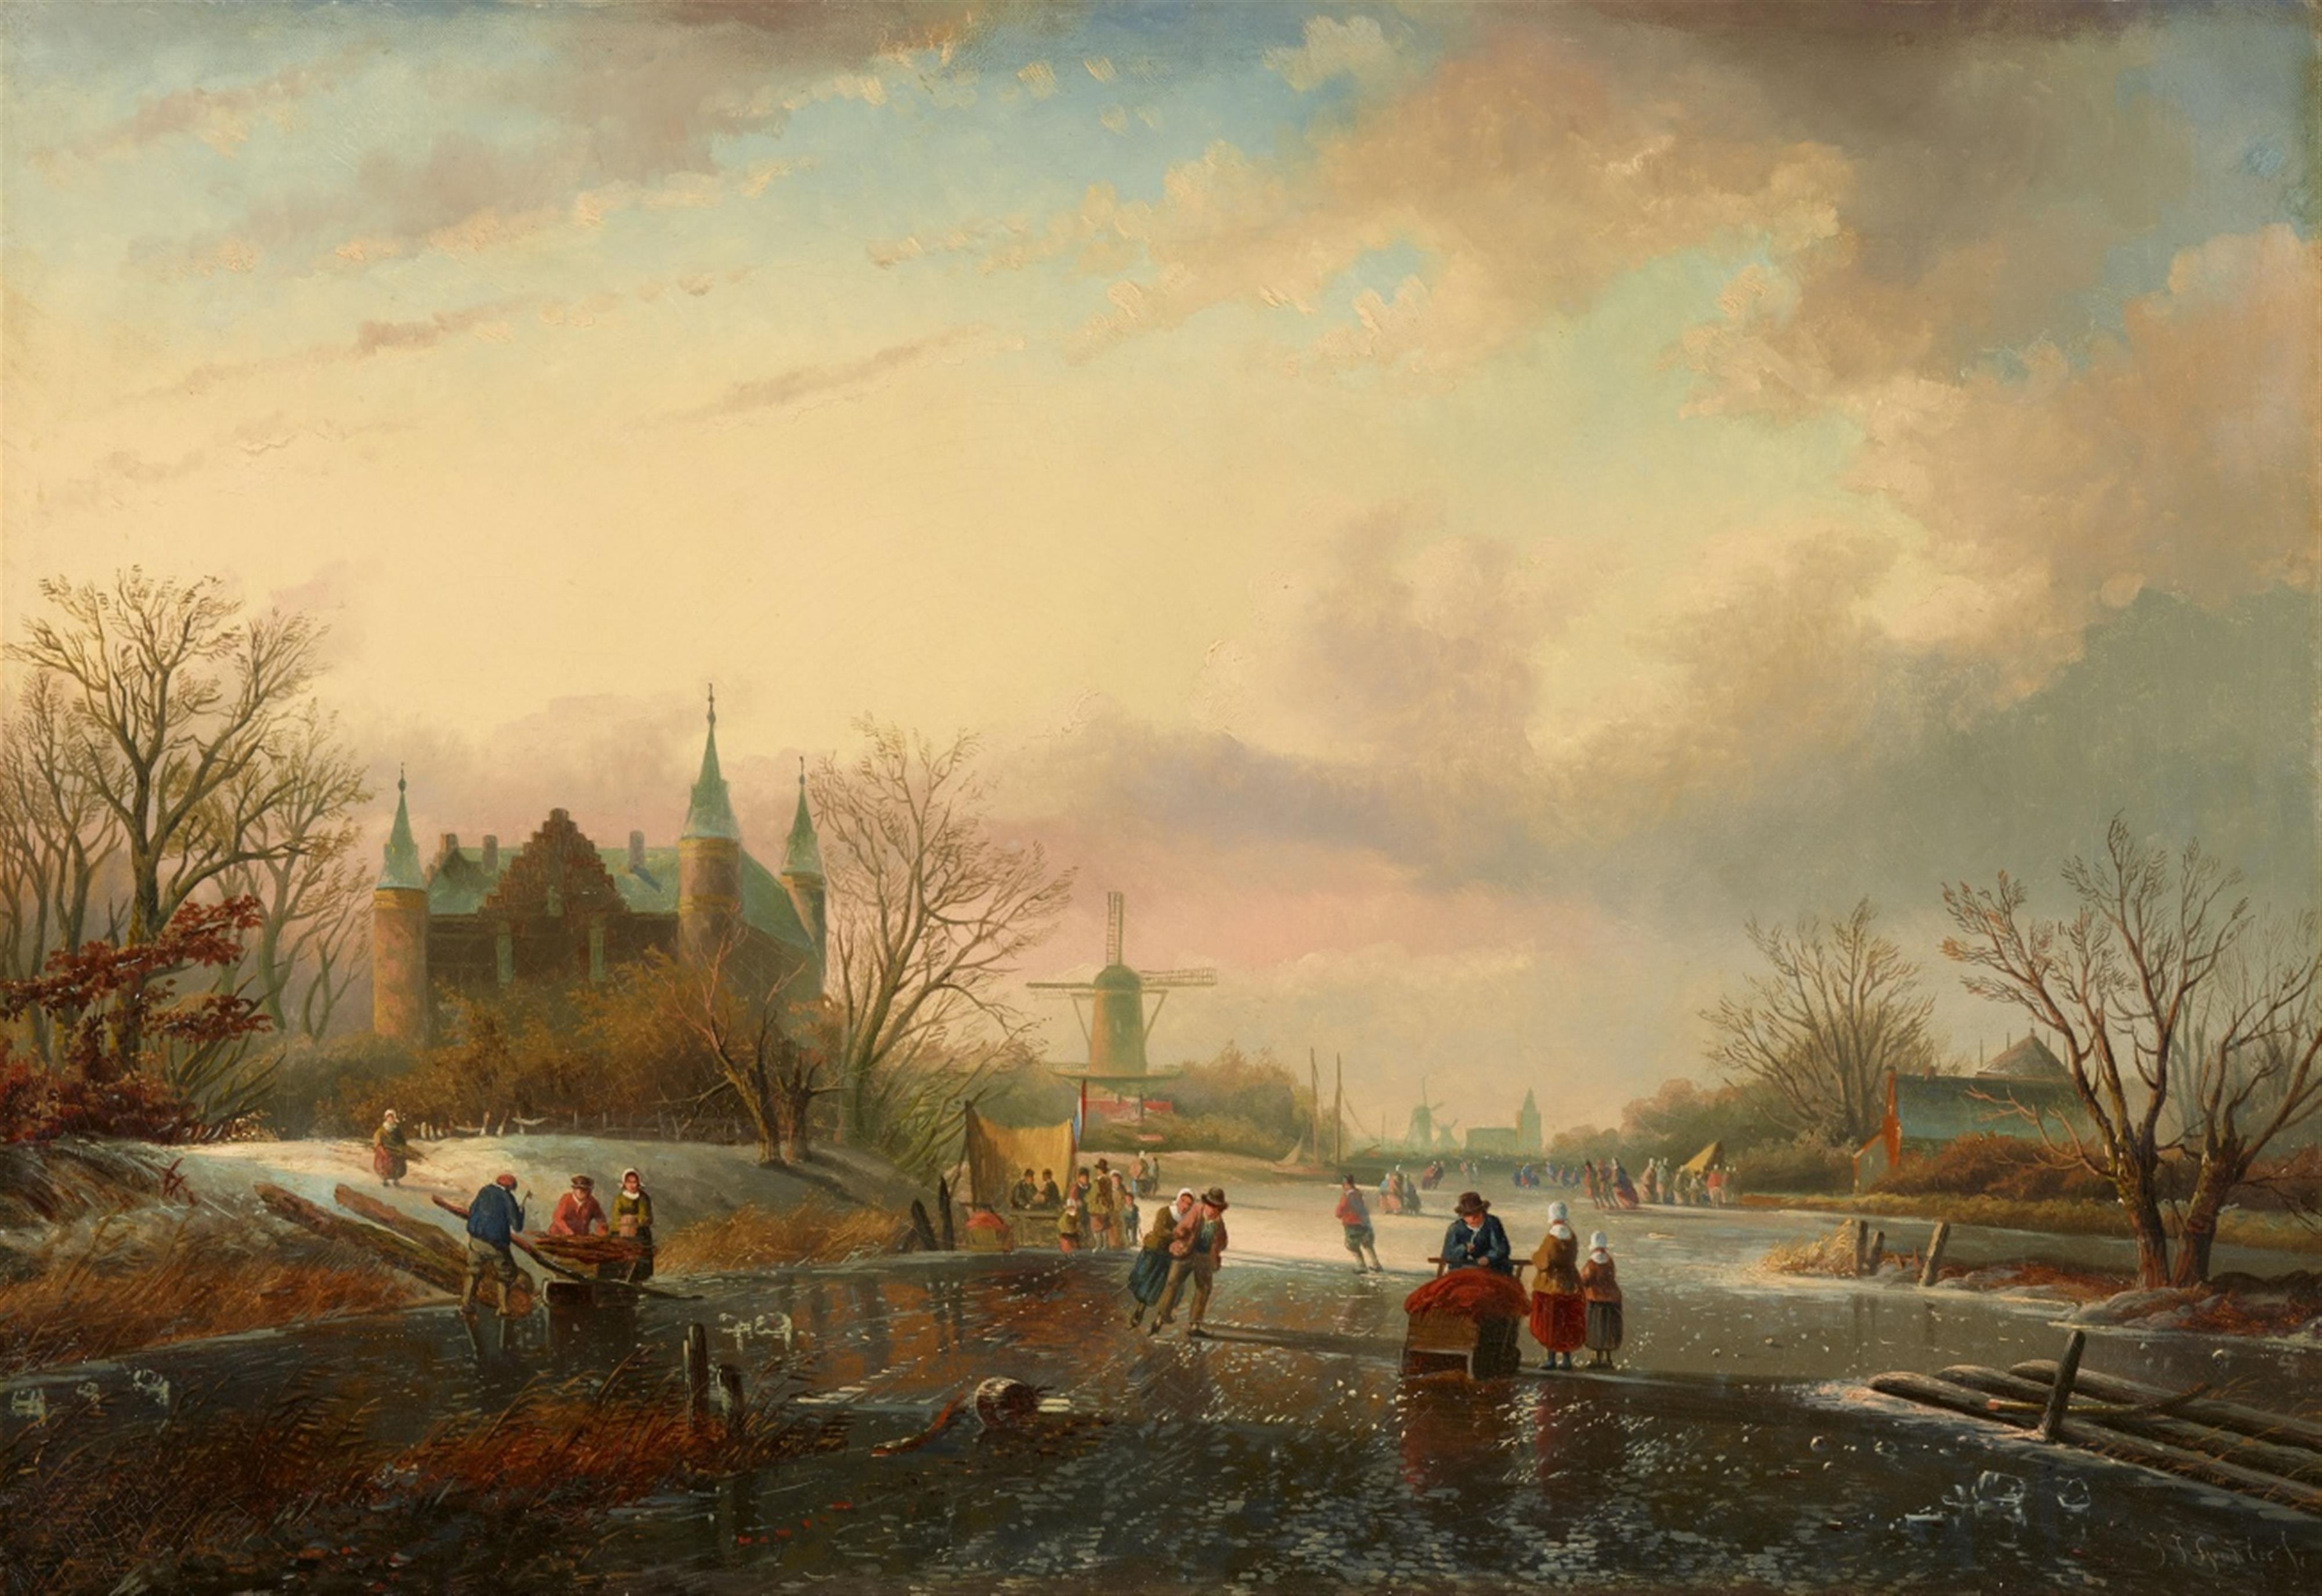 Jacob Jan Coenraad Spohler - Winter Landscape with a Castle and Ice Skaters - image-1